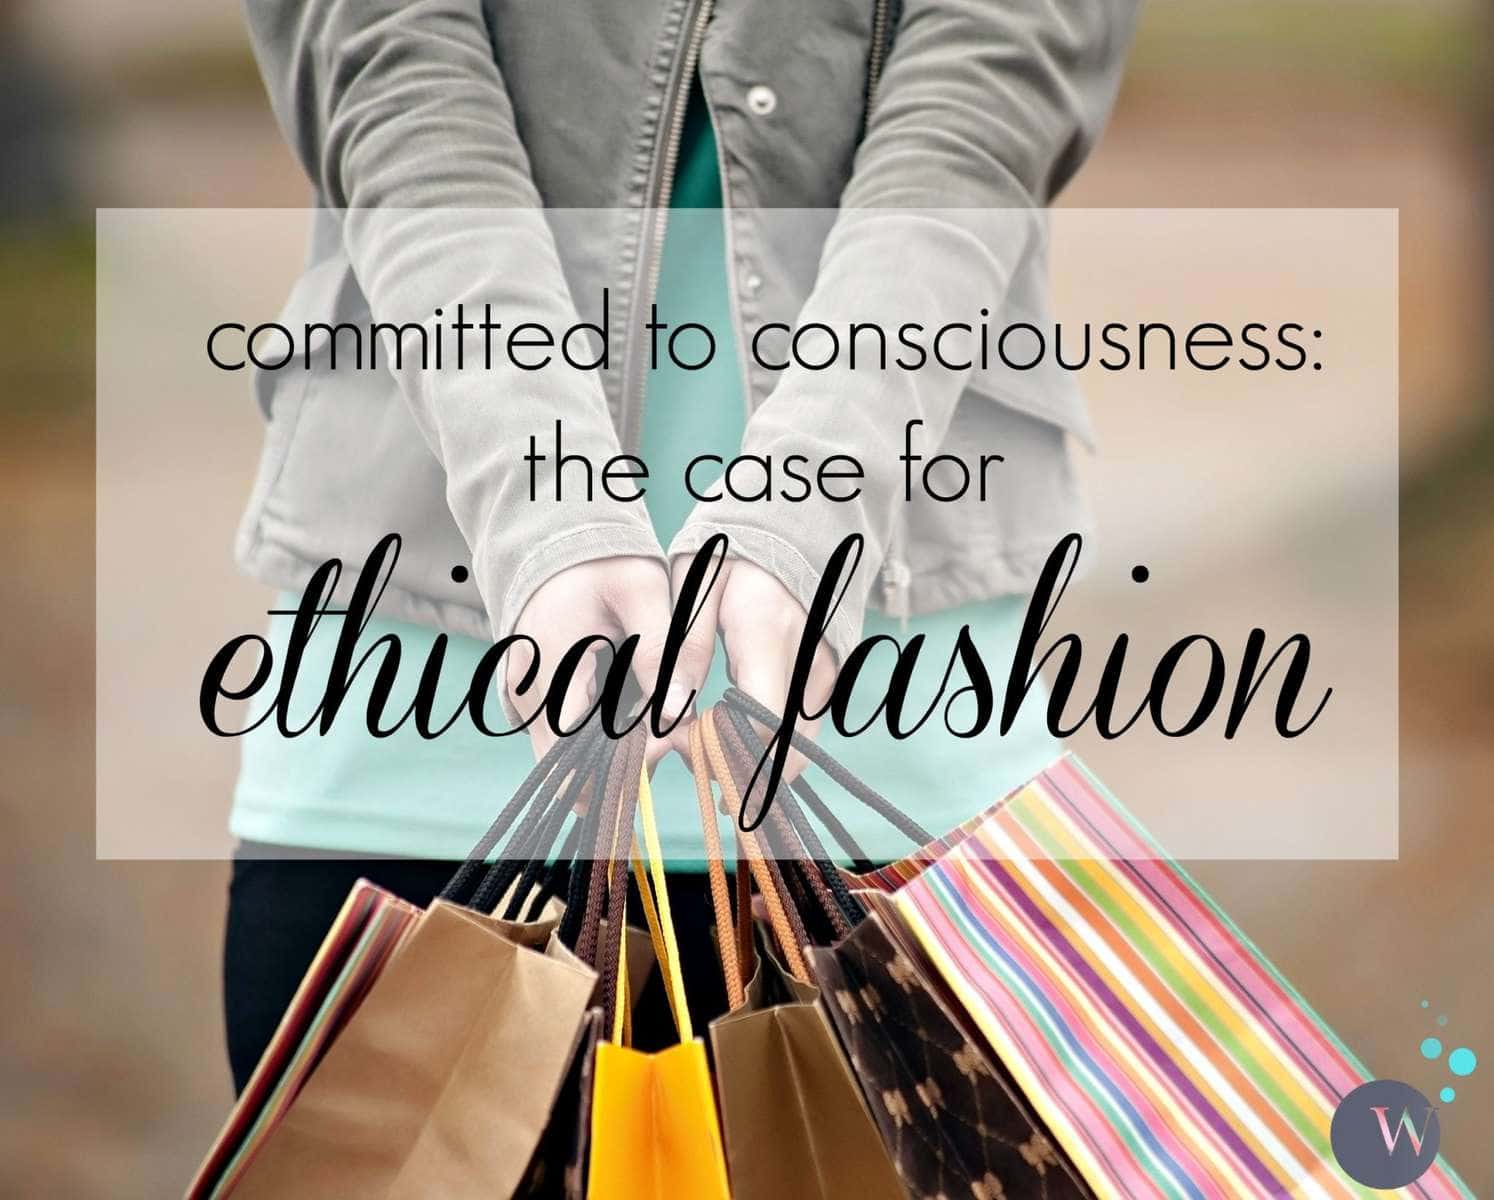 committed to consciousness: the case for ethical fashion by KC Sledd for the blog Wardrobe Oxygen